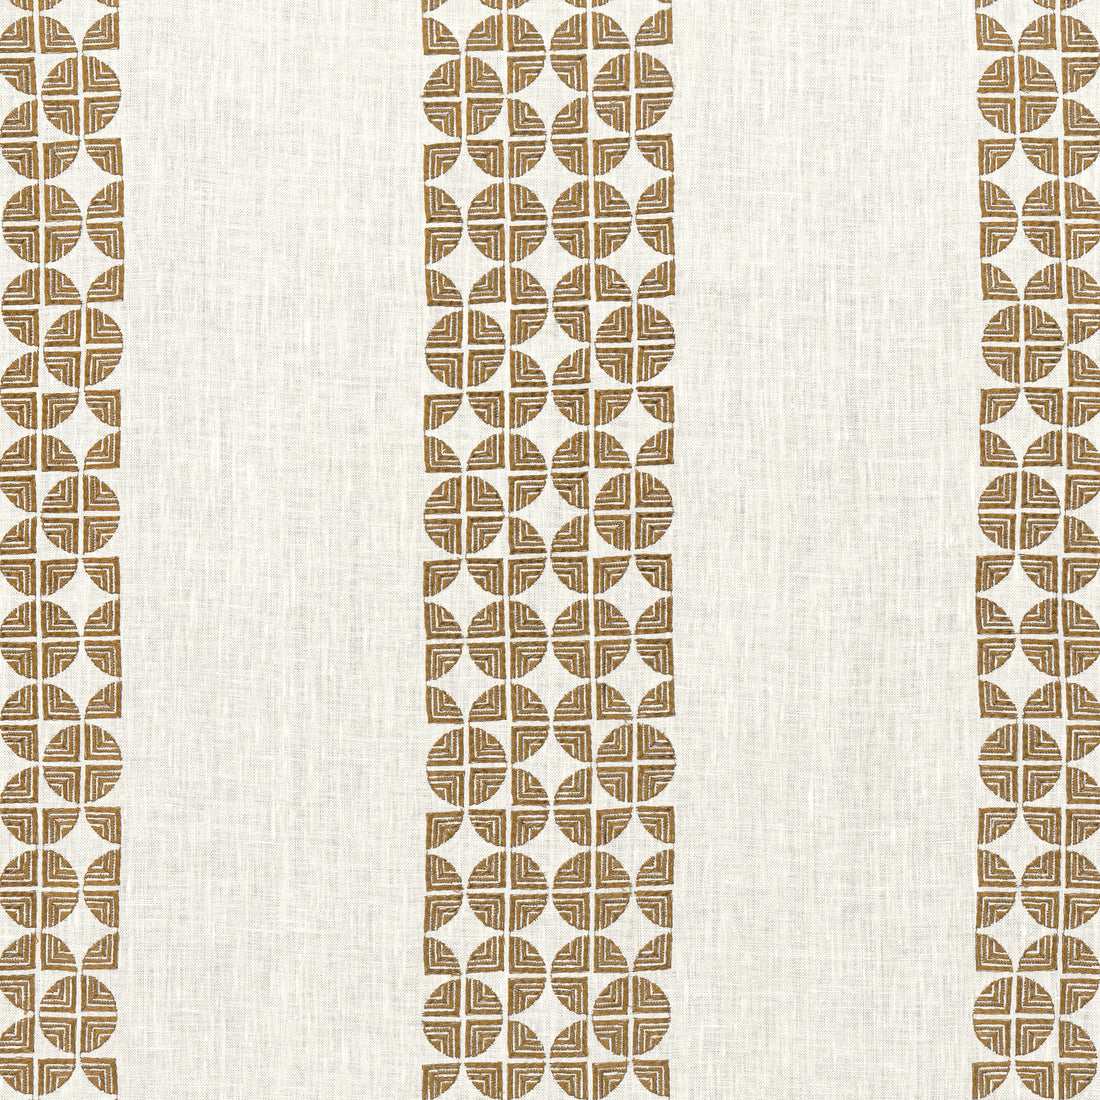 Fairmont Stripe Embroidery fabric in bronze color - pattern number AW23127 - by Anna French in the Willow Tree collection